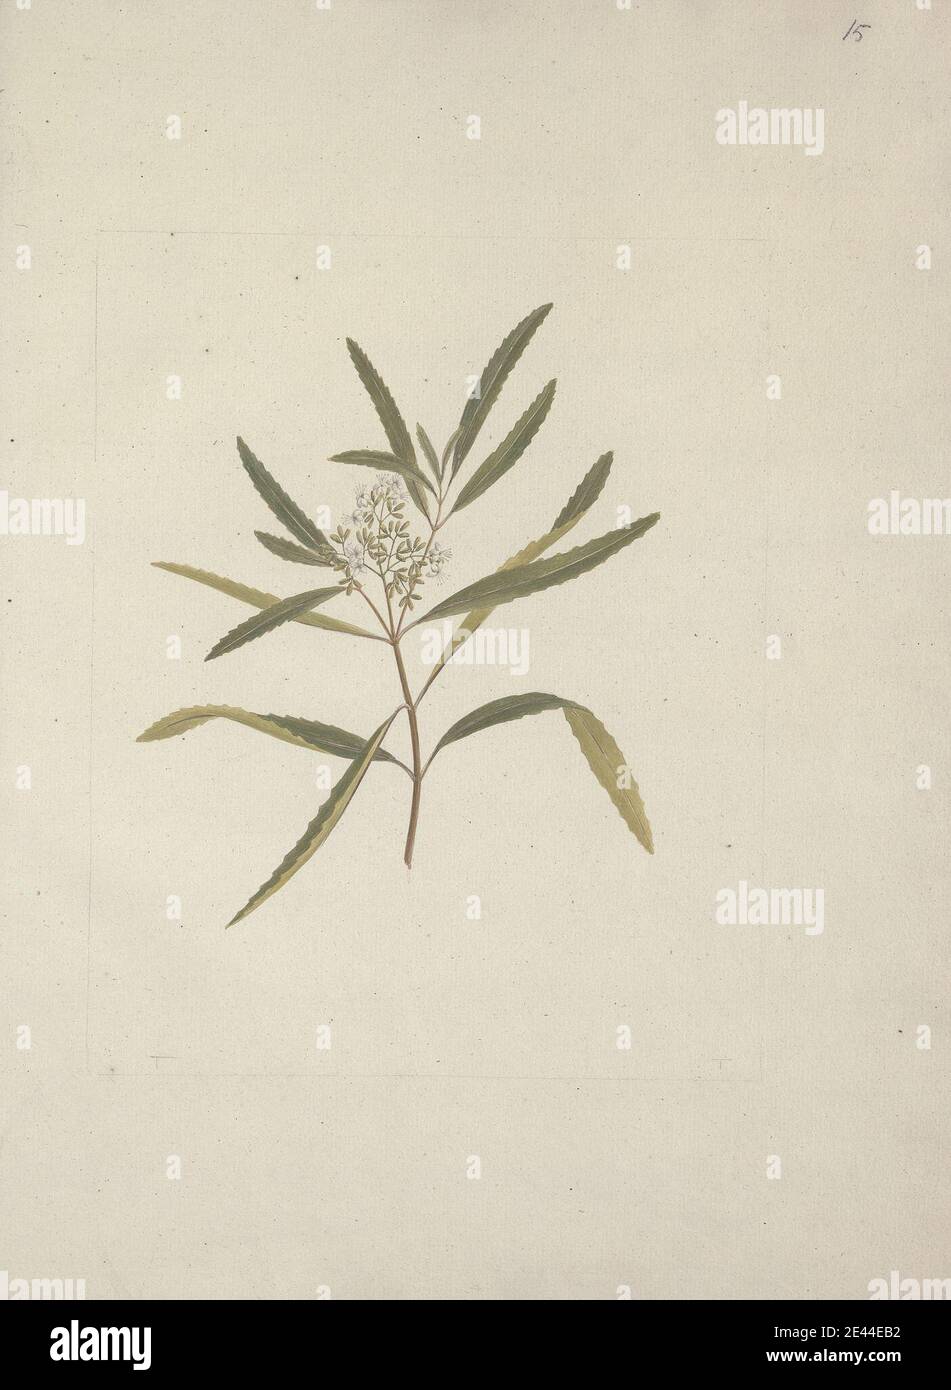 Luigi Balugani, 1737â€“1770, Italian, Nuxia oppositifolia (Hochst.) Benth. : finished drawing without detail of leaf, undated. Watercolor and gouache over graphite on medium, slightly textured, cream laid paper. Stock Photo